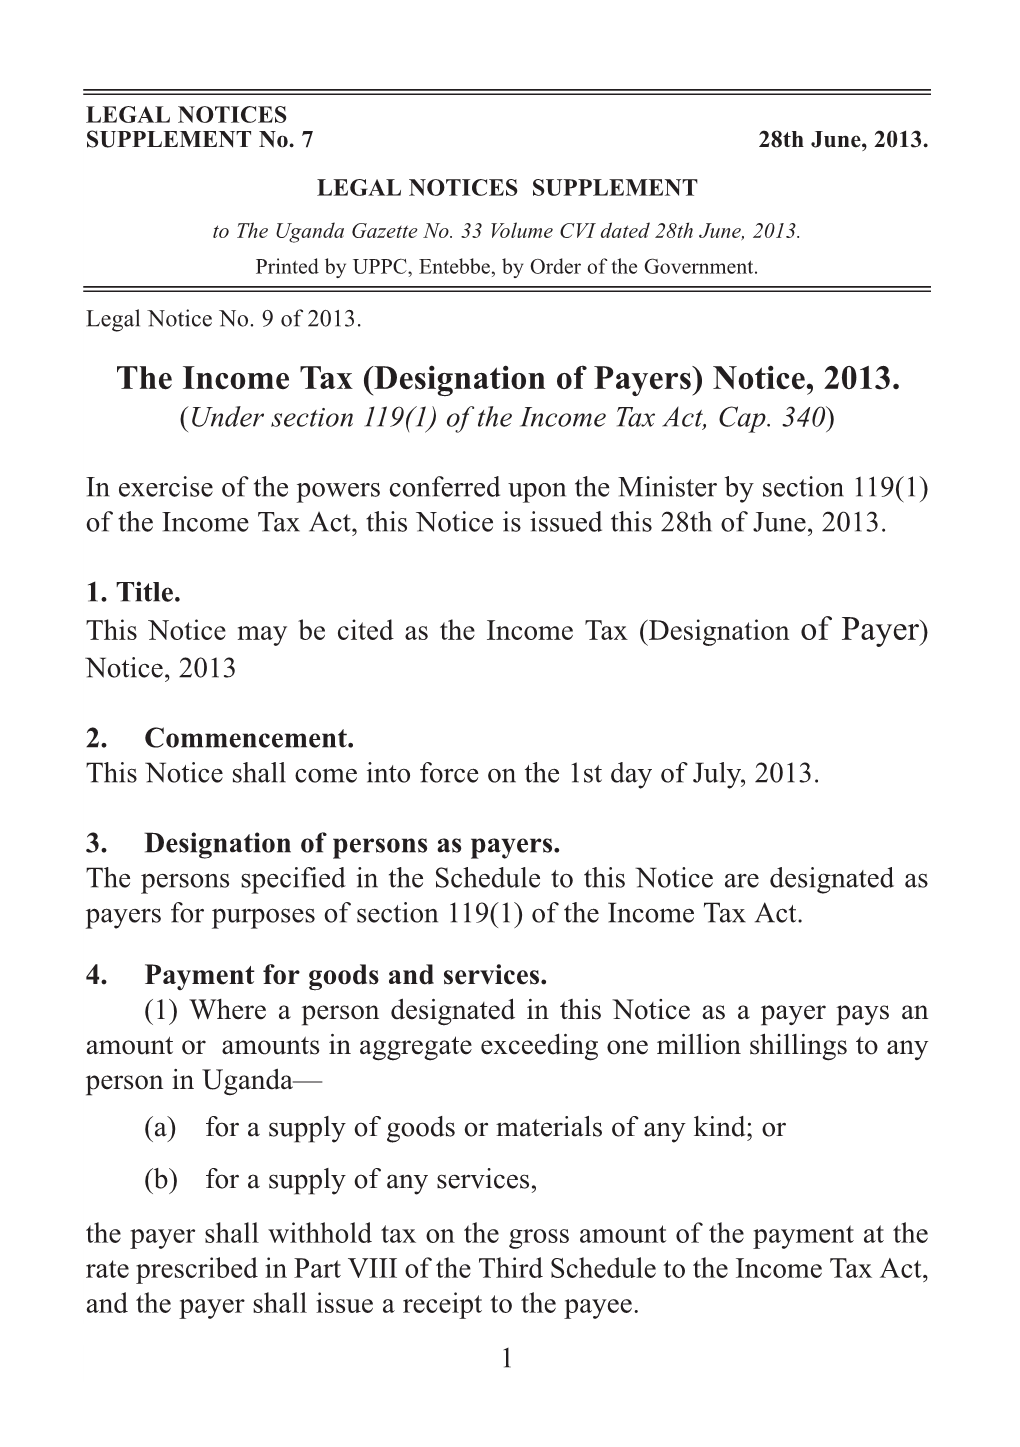 The Income Tax (Designation of Payers) Notice, 2013. (Under Section 119(1) of the Income Tax Act, Cap